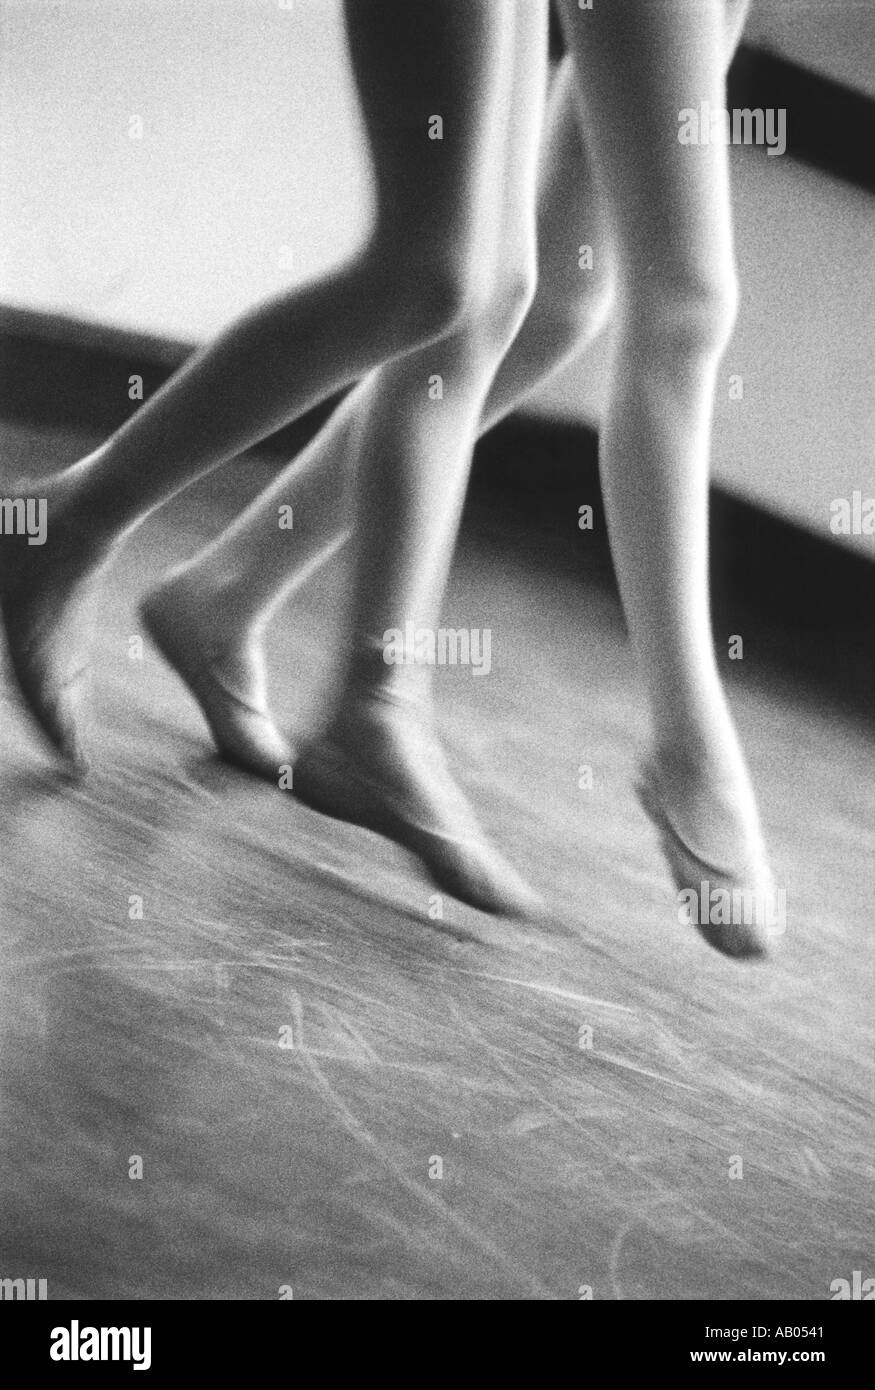 Dancers legs with ballet slippers Stock Photo